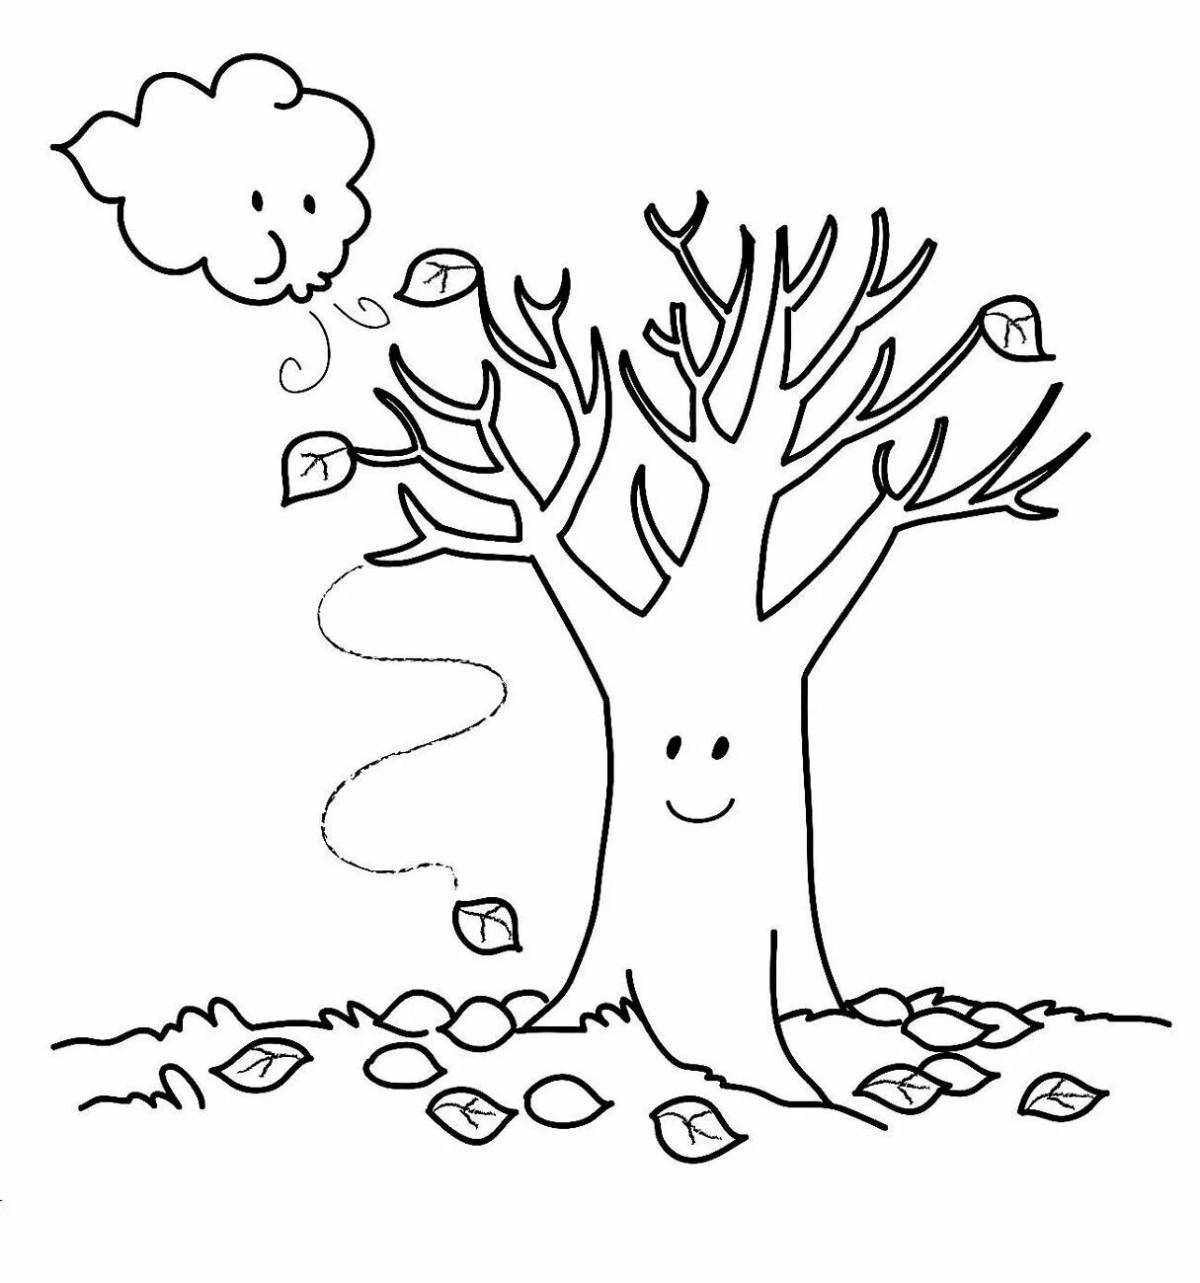 Amazing winter tree coloring page for 3-4 year olds